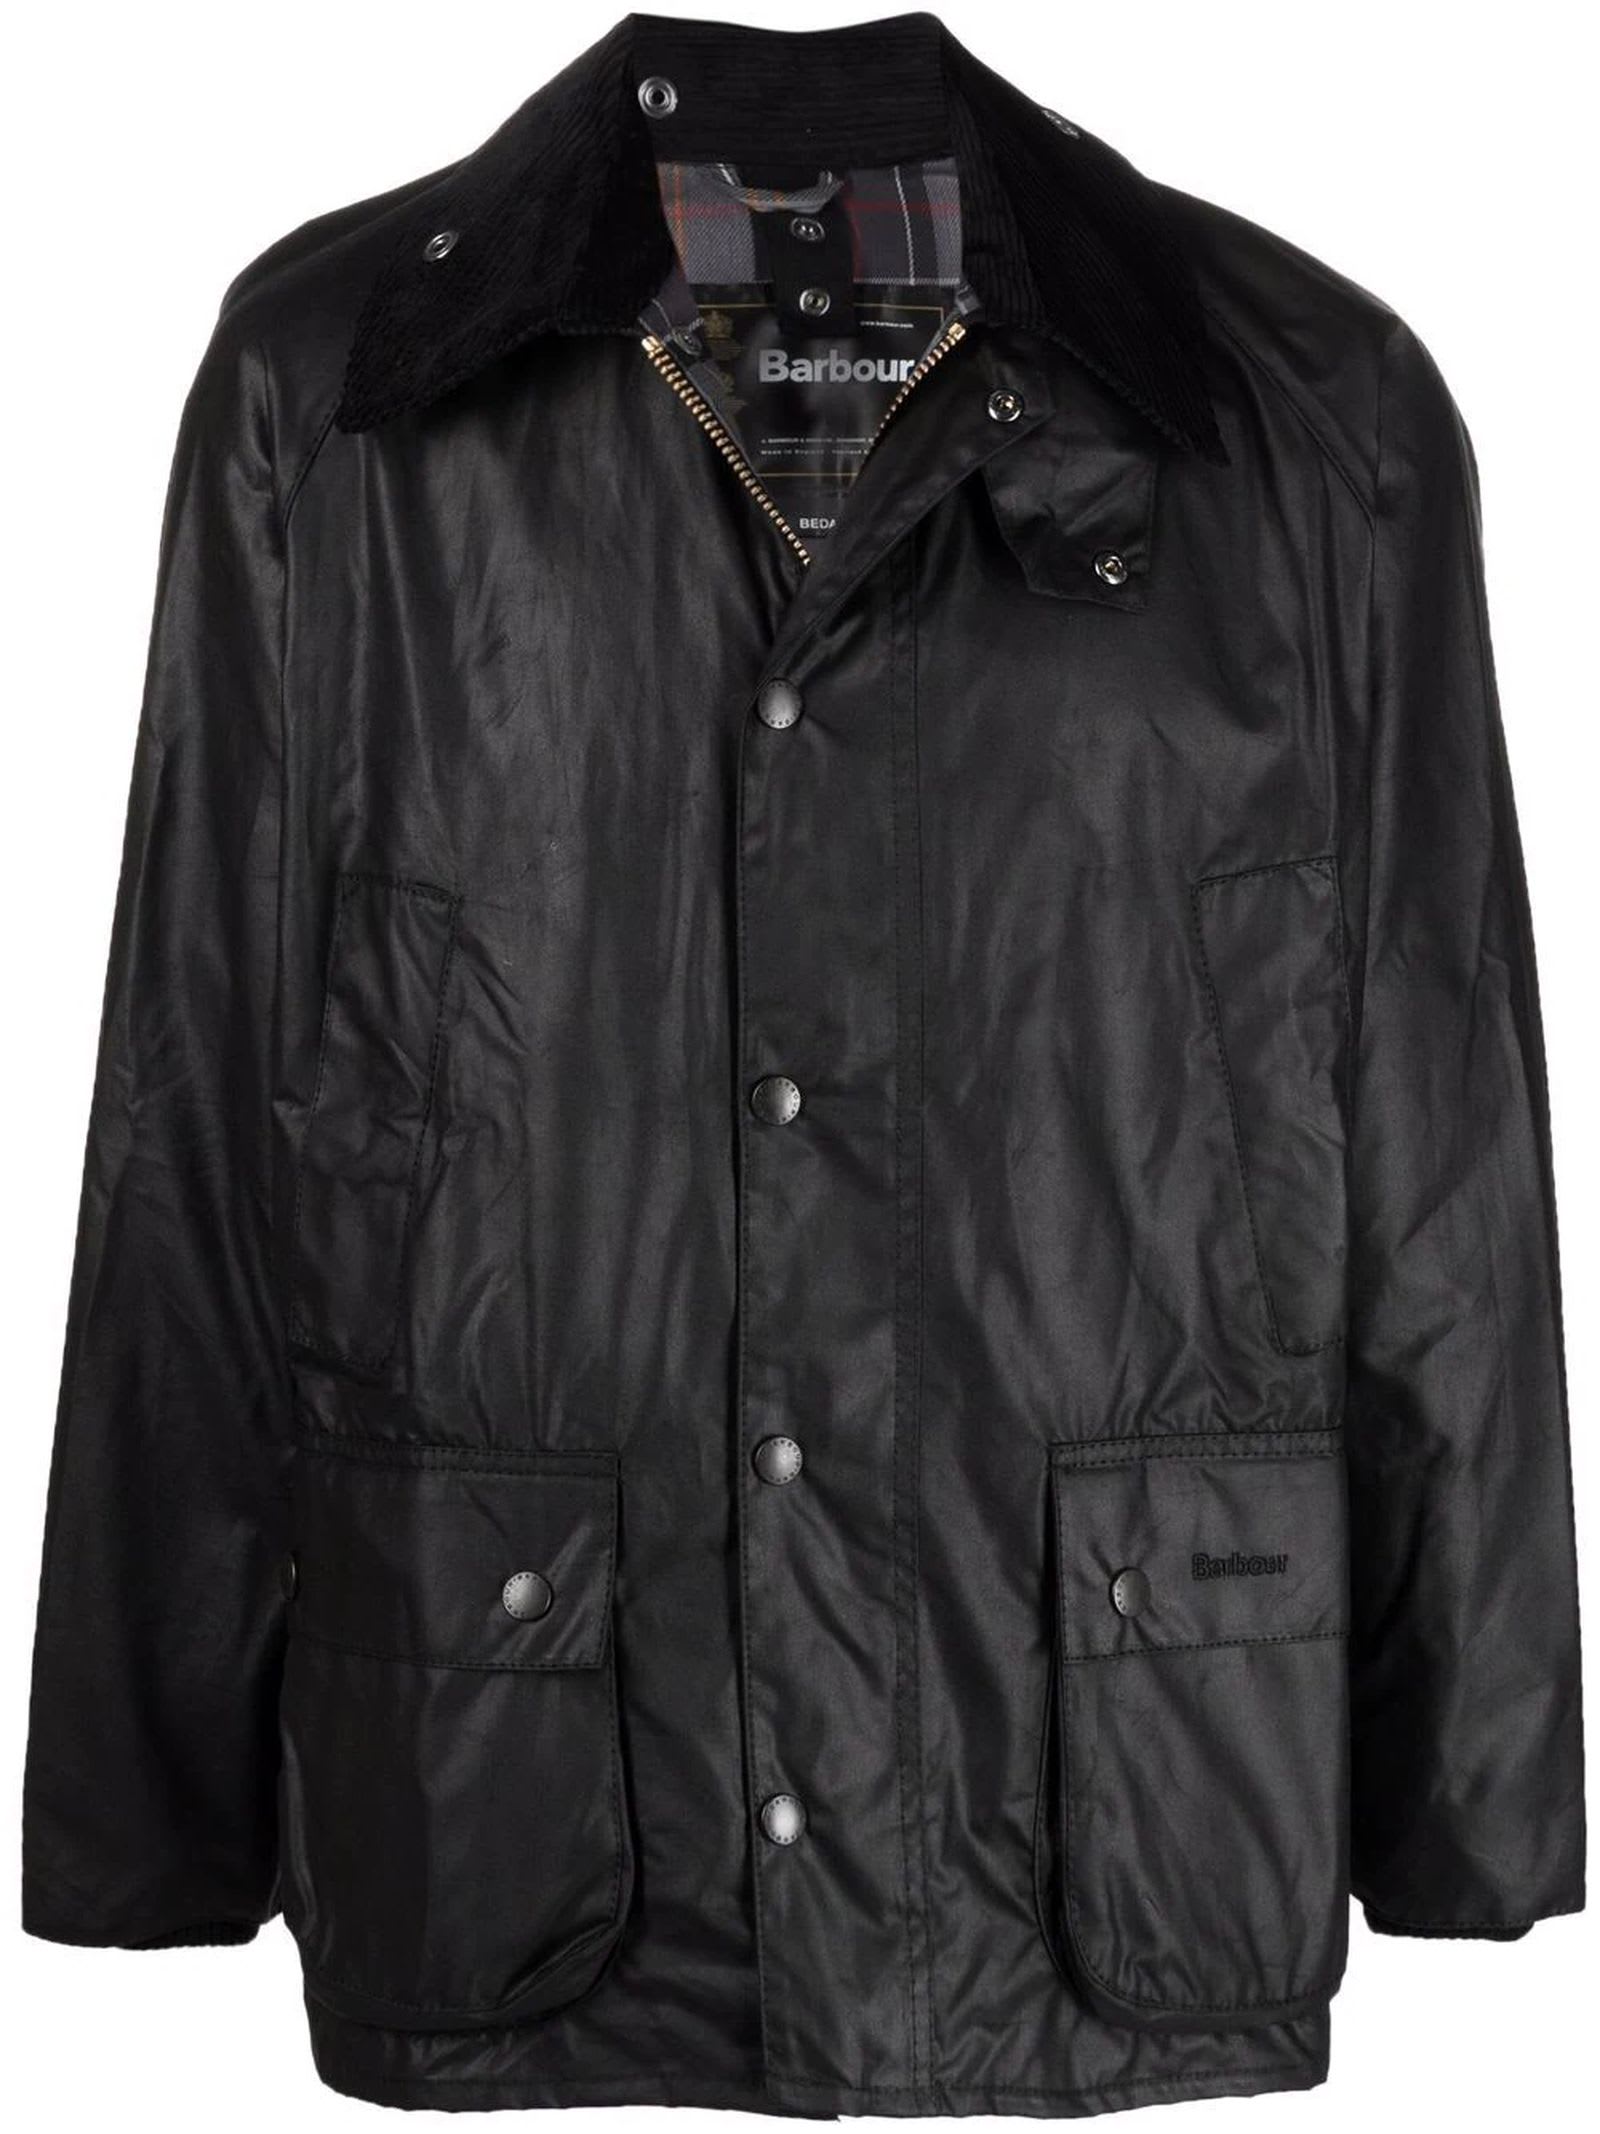 Barbour Black Cotton Classic Waxed Jacket